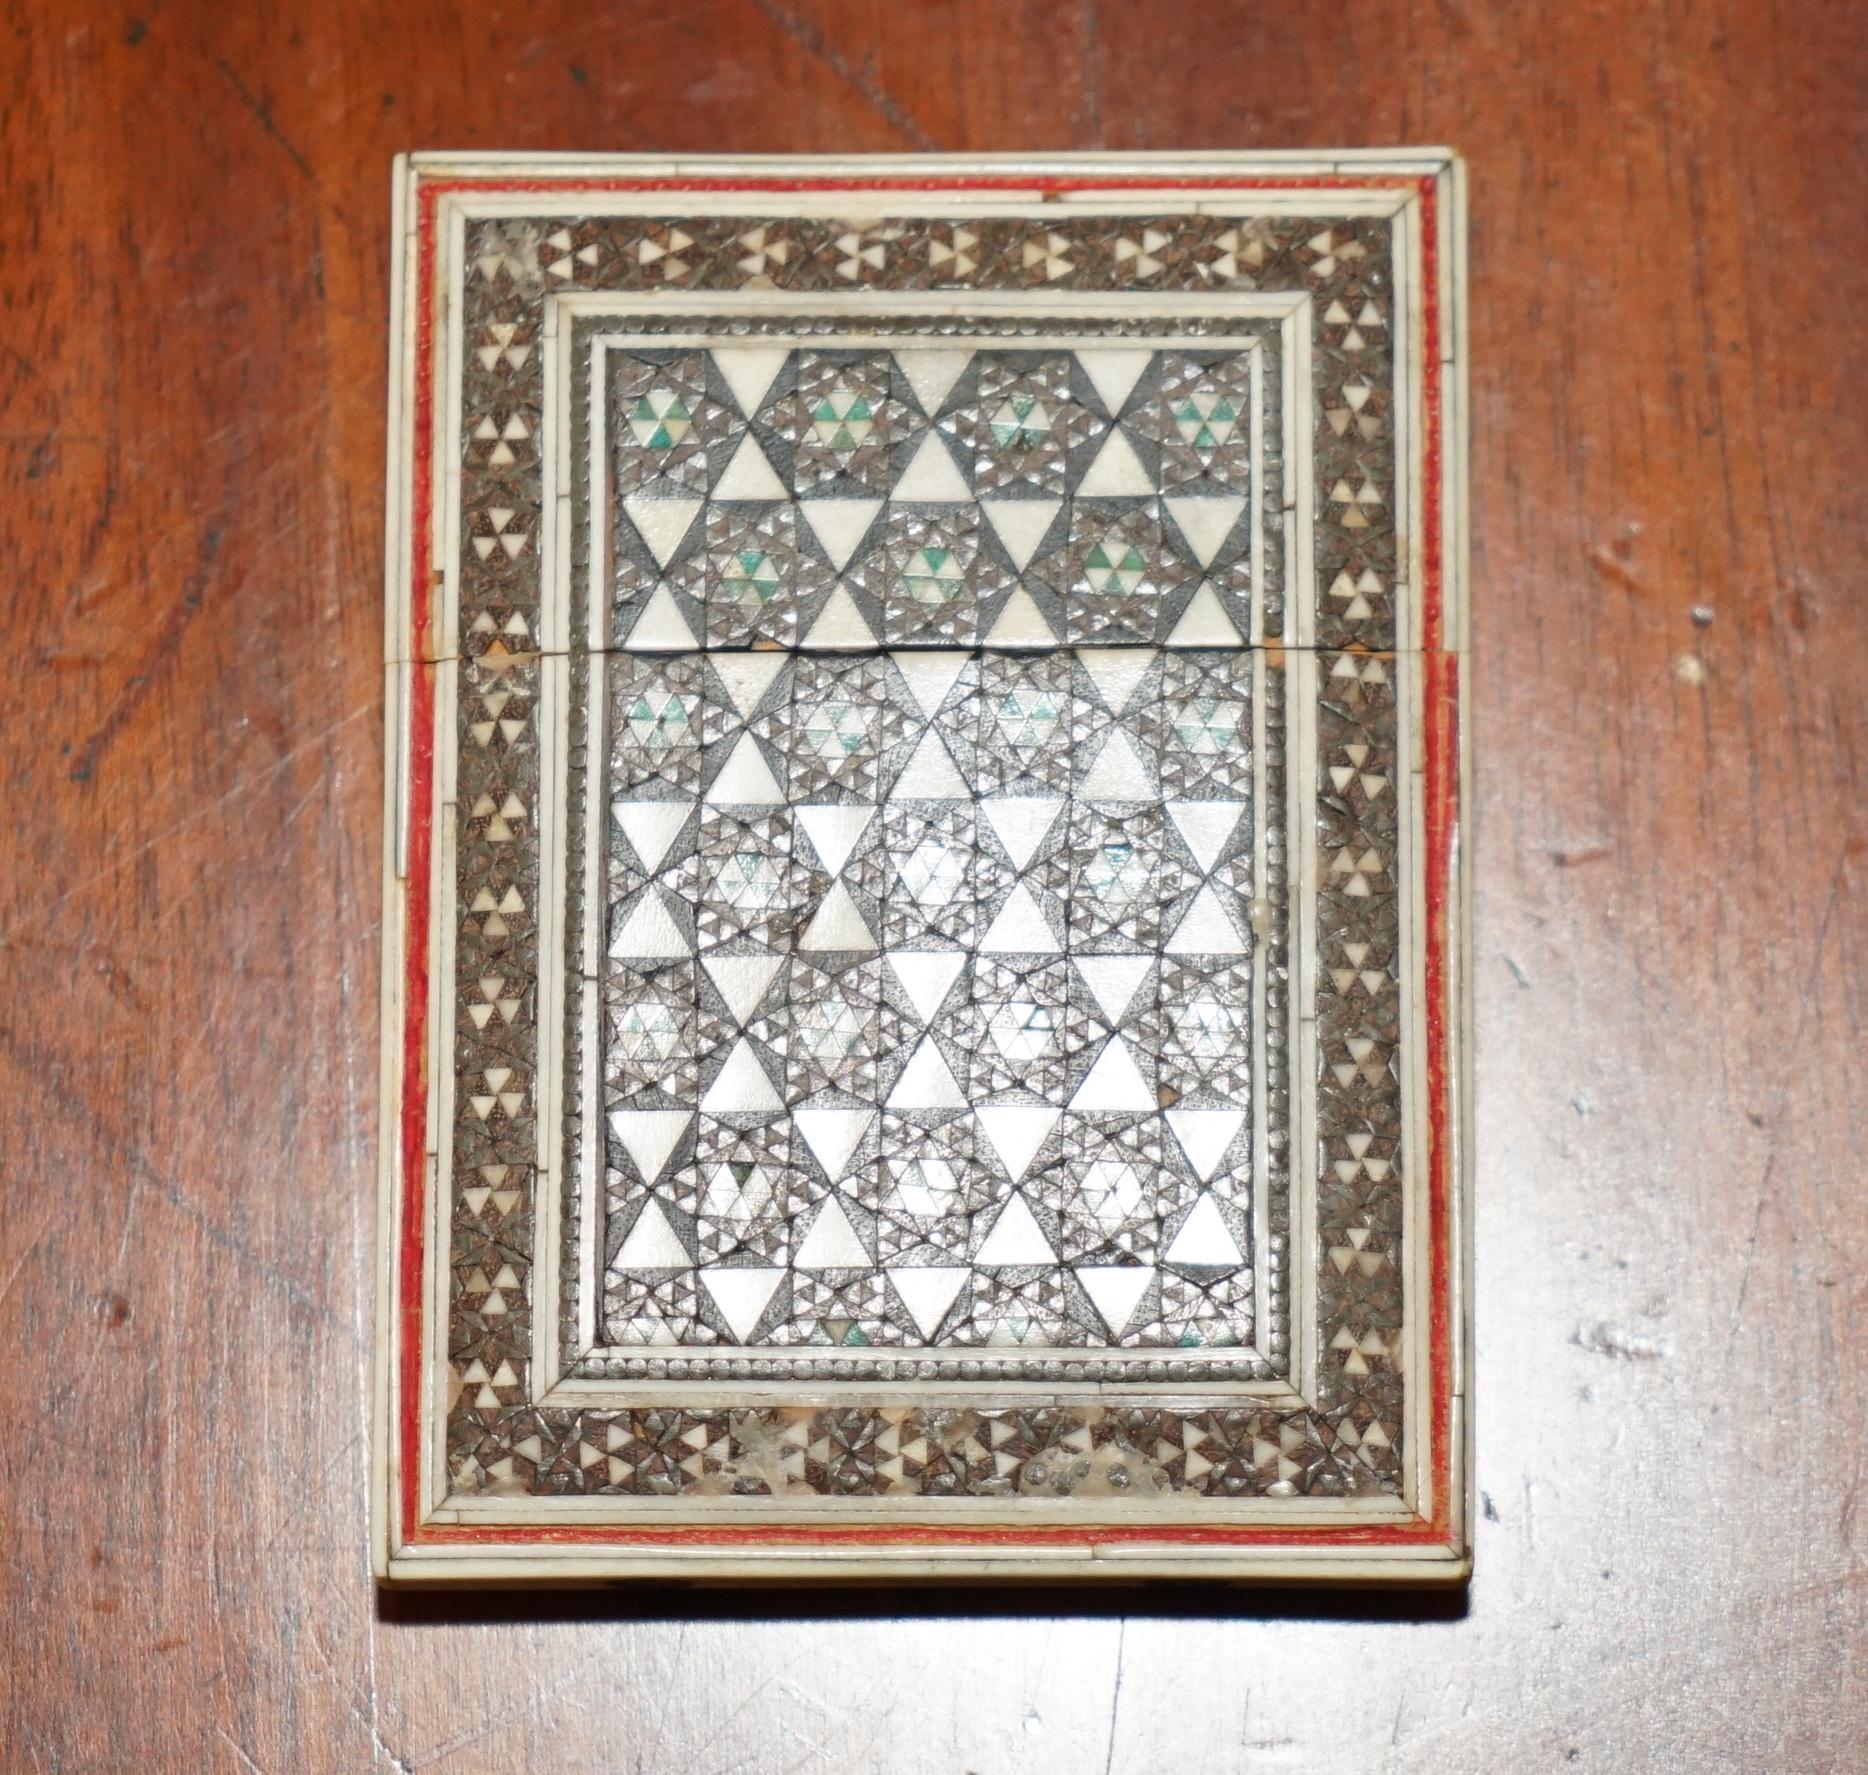 Royal House Antiques

Royal House Antiques is delighted to offer for sale this lovely, super decorative antique Islamic Anglo Indian Sadeli Micro Mosaic Card Case

A wonderfully original find, this isn’t one of the much later reproductions but a